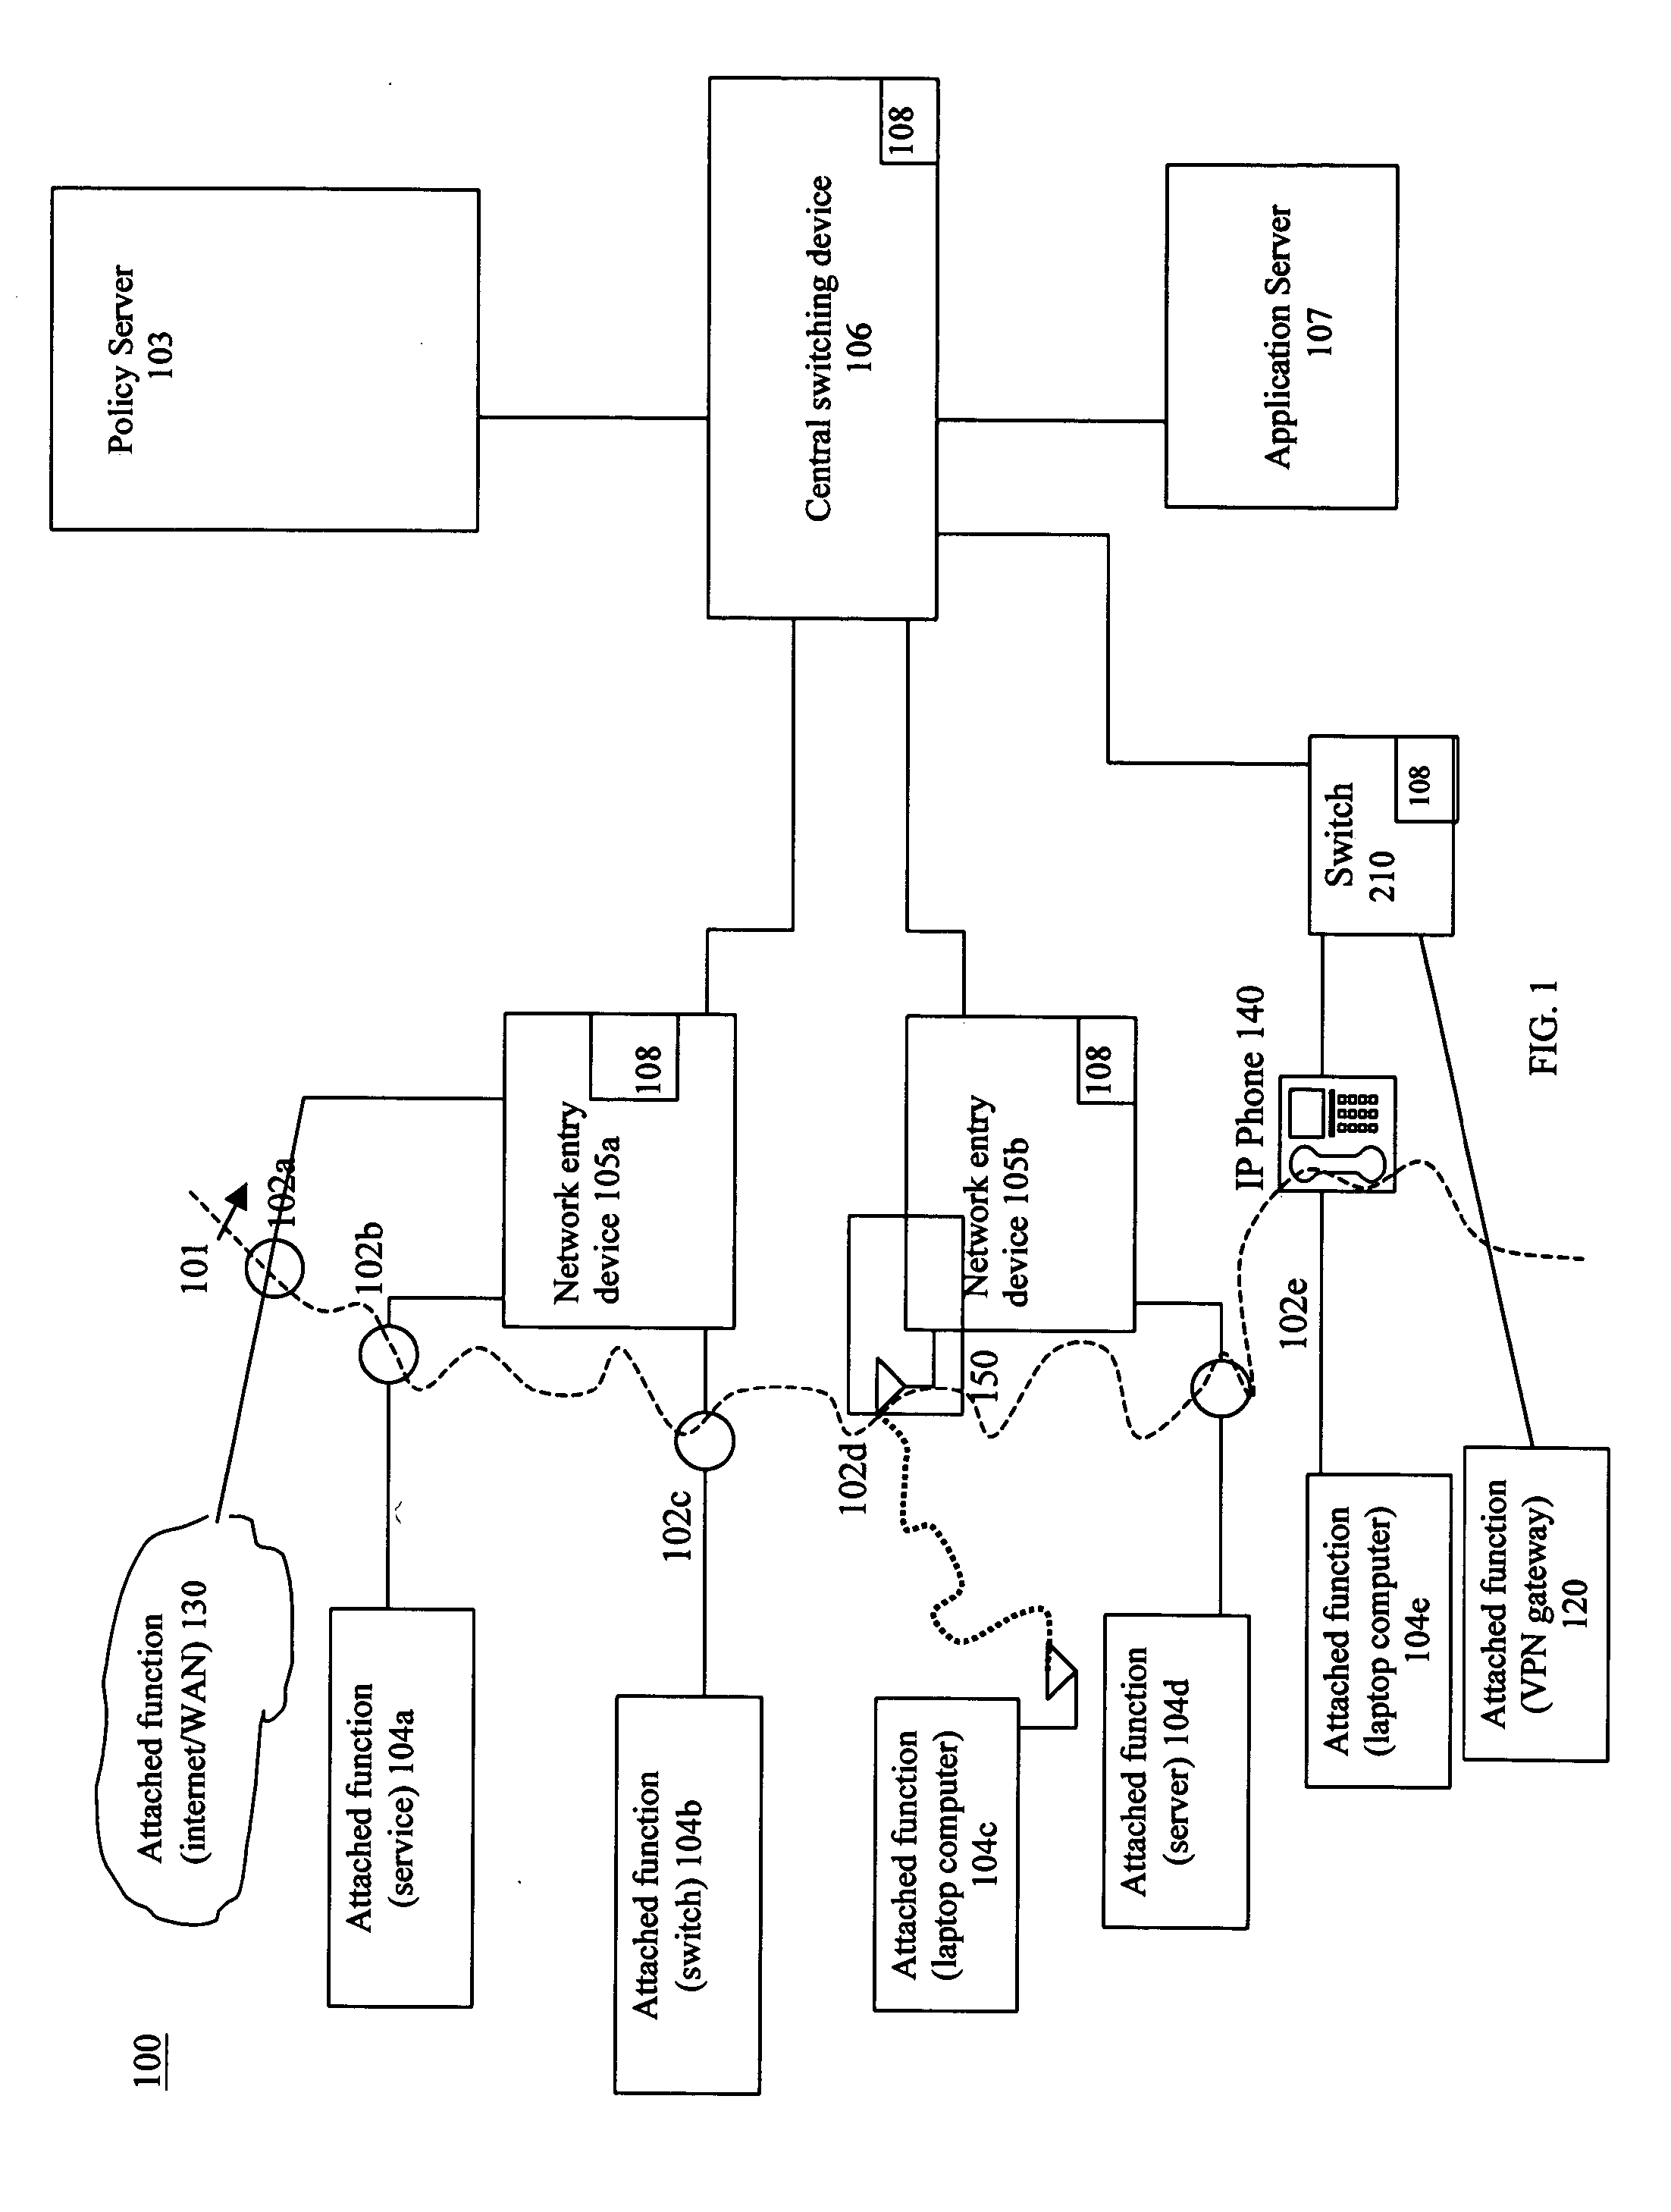 Distributed intrusion response system